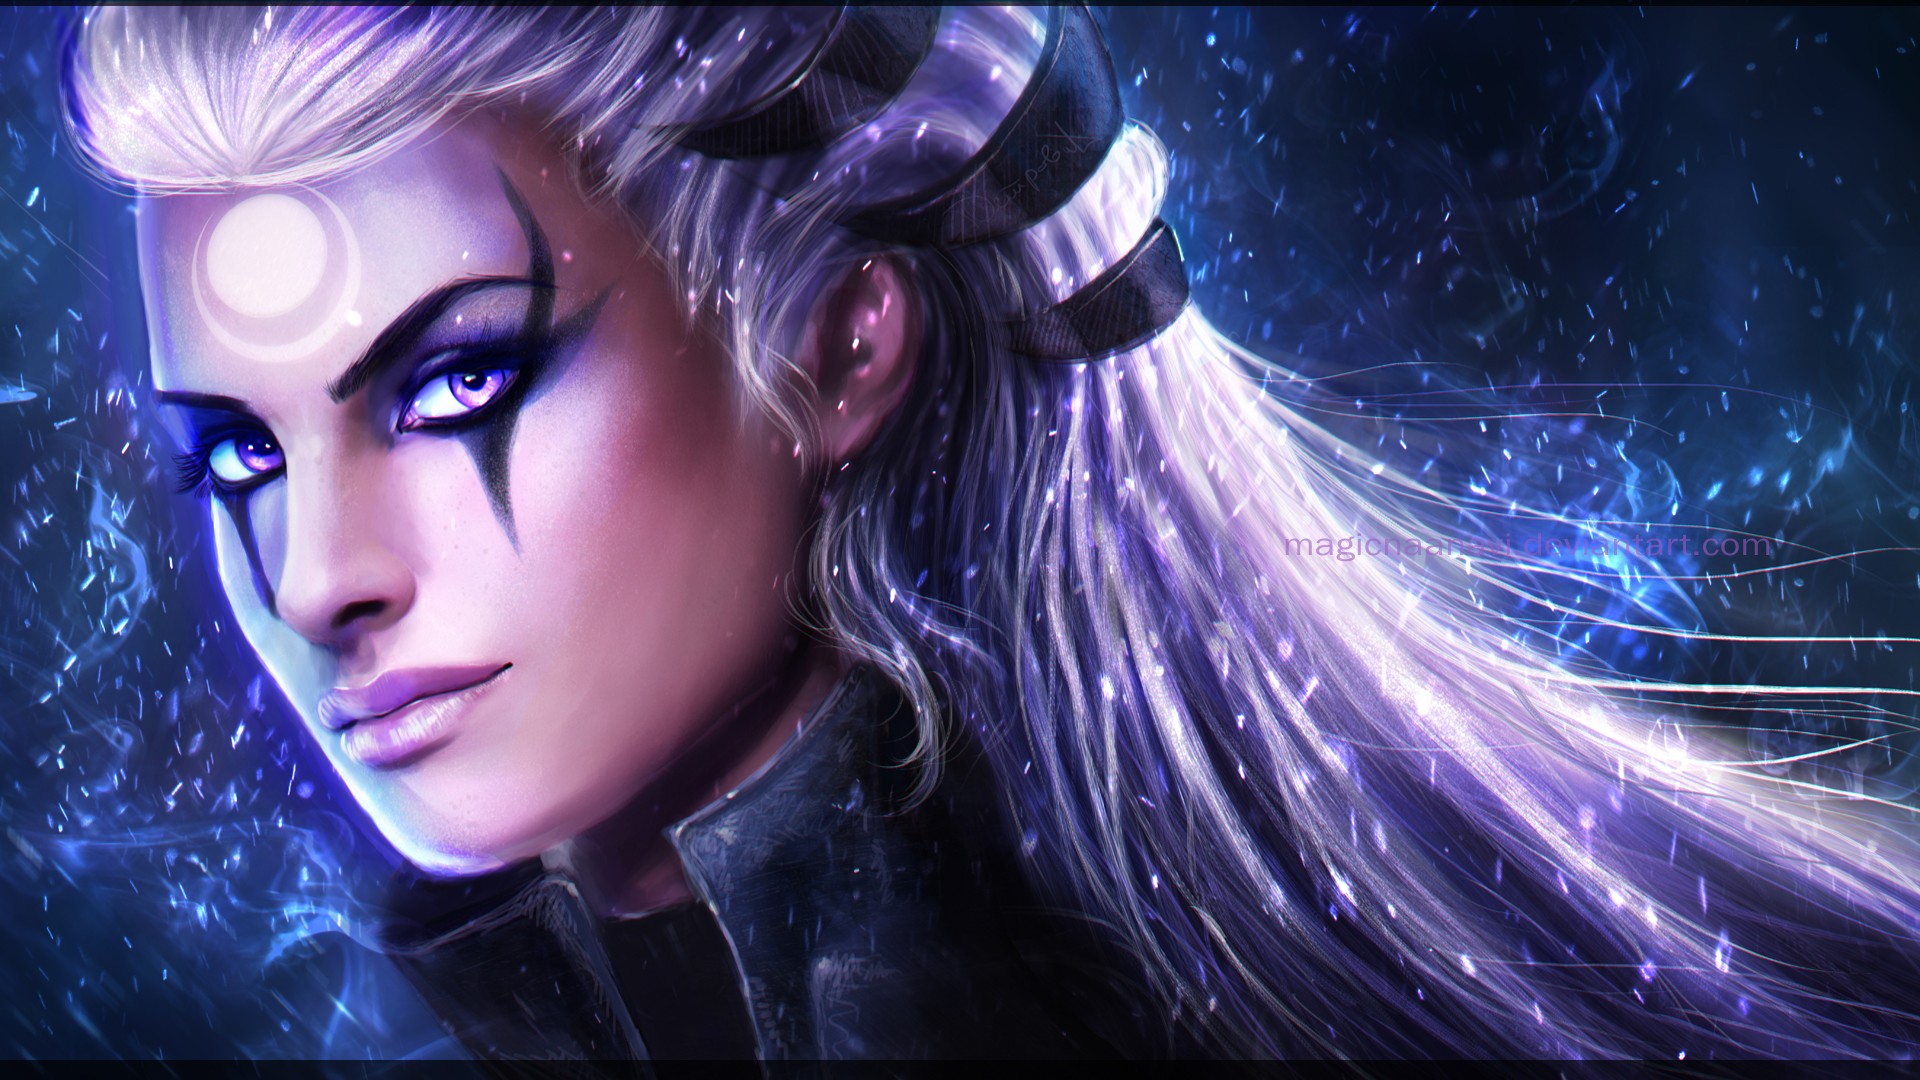 Anime 1920x1080 anime girls anime realistic League of Legends Riot Games MagicnaAnavi PC gaming video games makeup women long hair DeviantArt fantasy art fantasy girl pink eyes looking at viewer Diana (League of Legends)